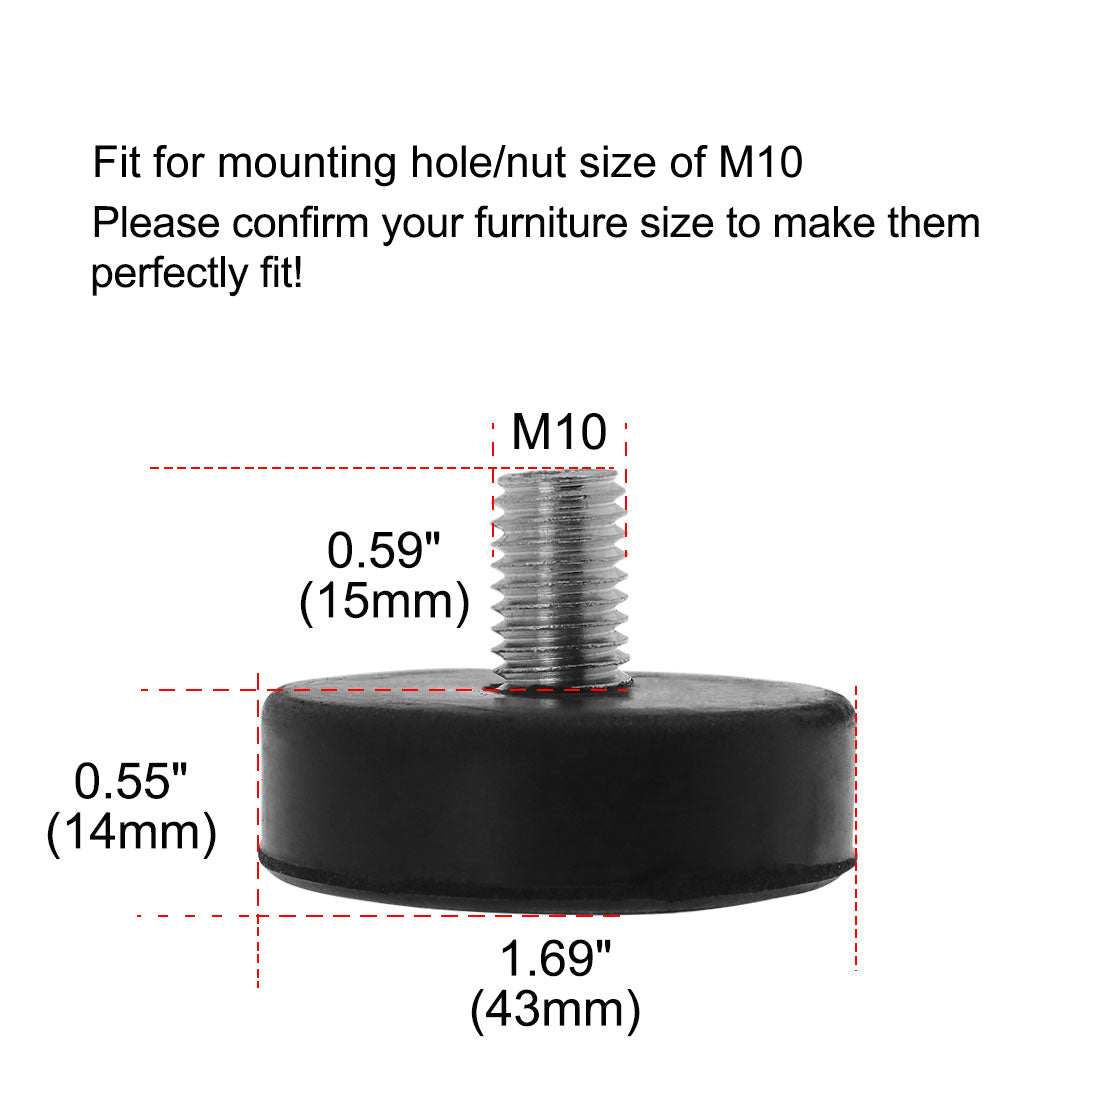 uxcell Uxcell M10 x 15 x 43mm Leveling Feet Adjustable Leveler Floor Protector Round Base for Furniture Chair Table Leg 16pcs